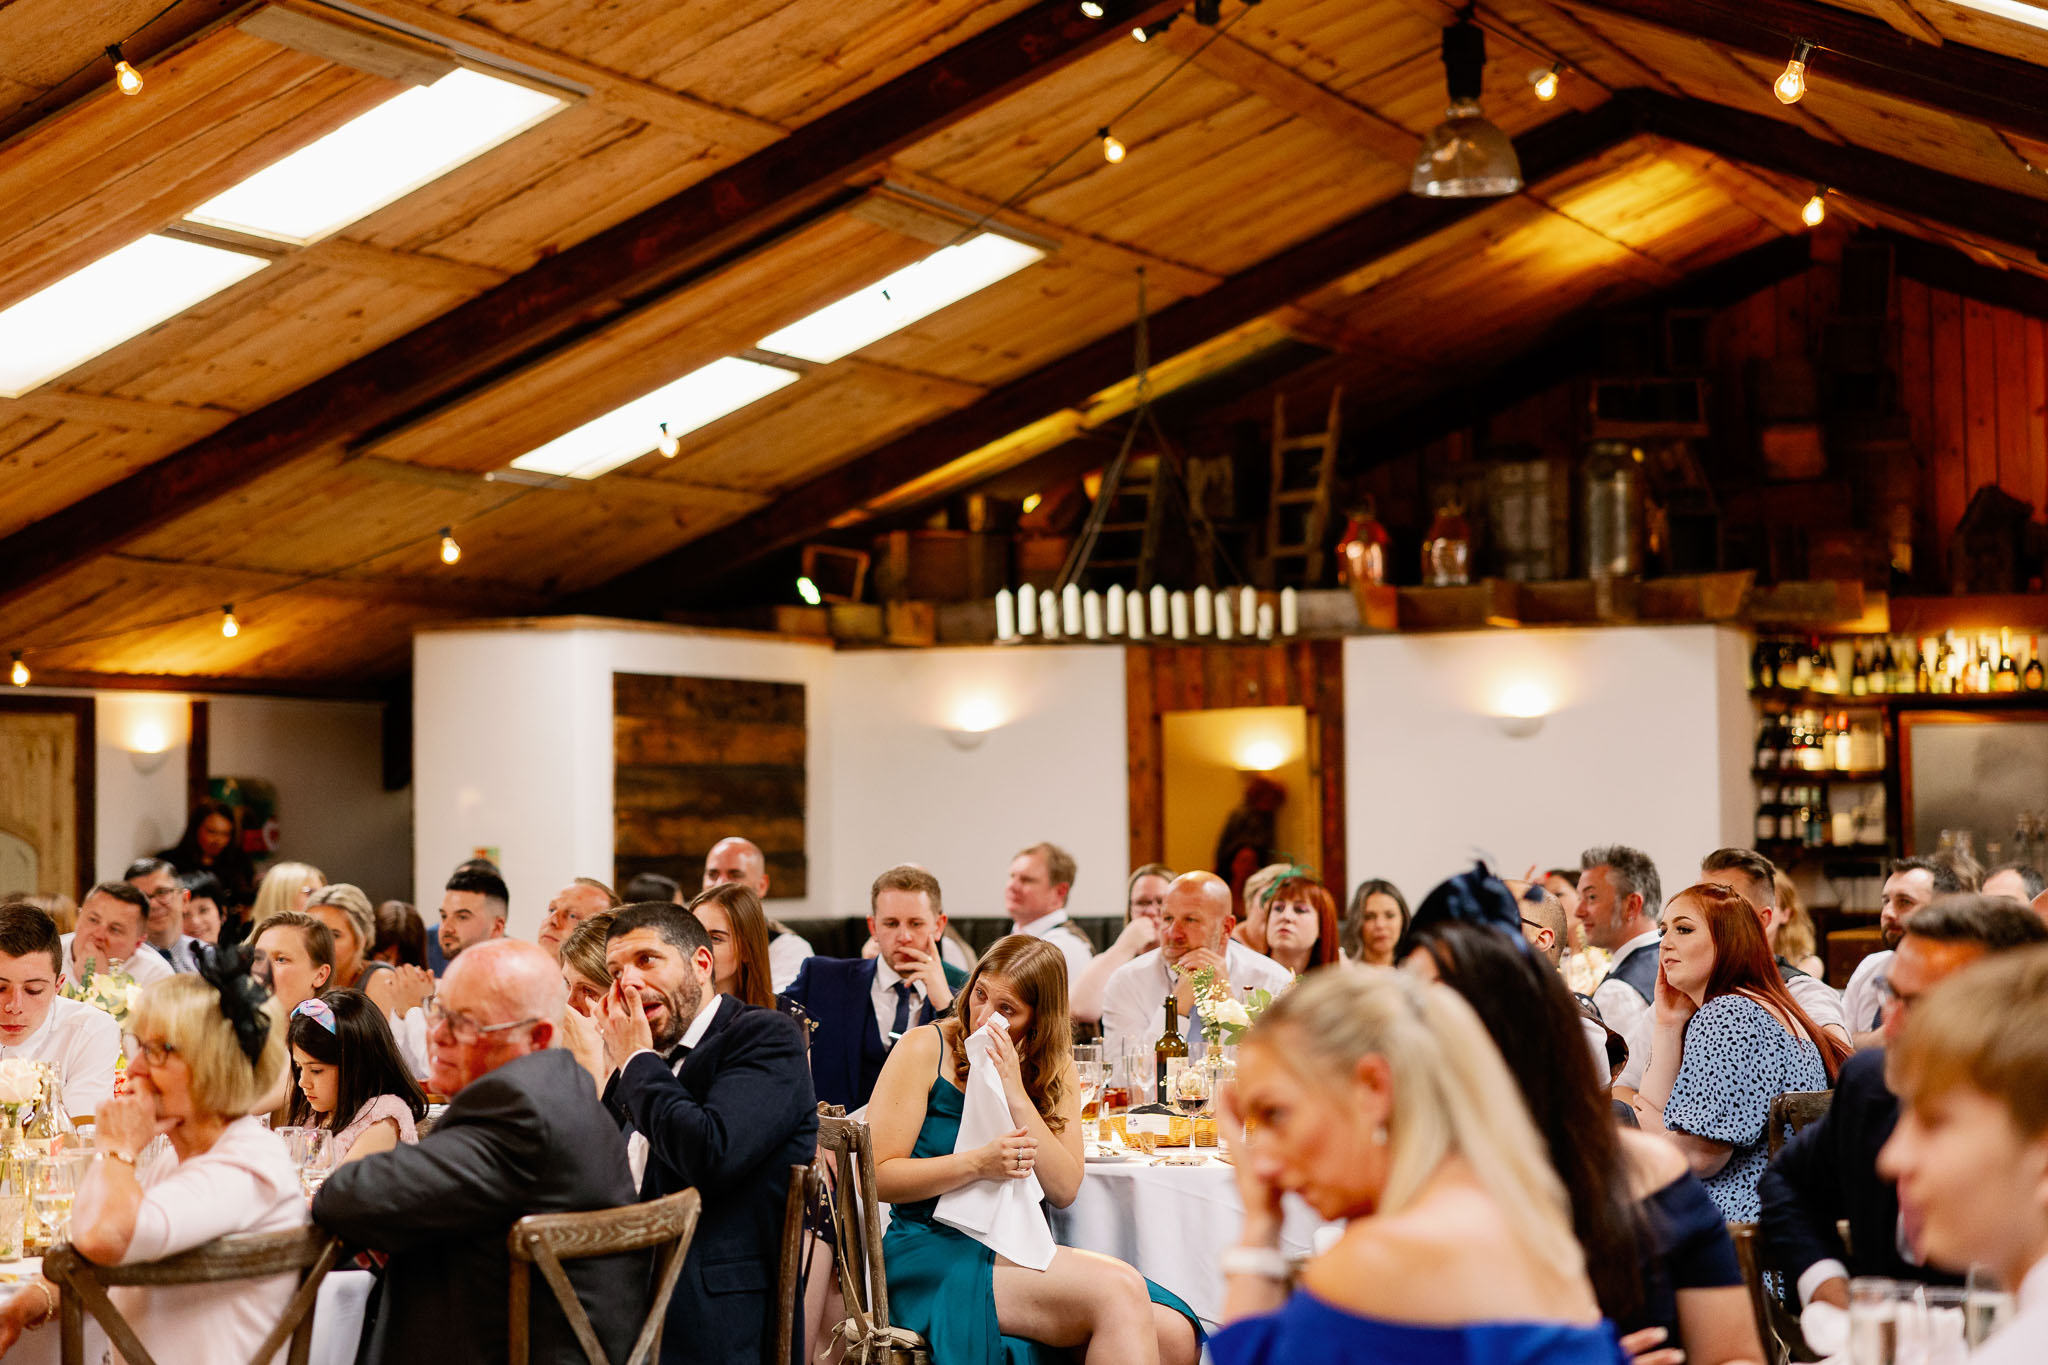 Wedding Speeches in a Barn Wedding Venue in the North West of the UK